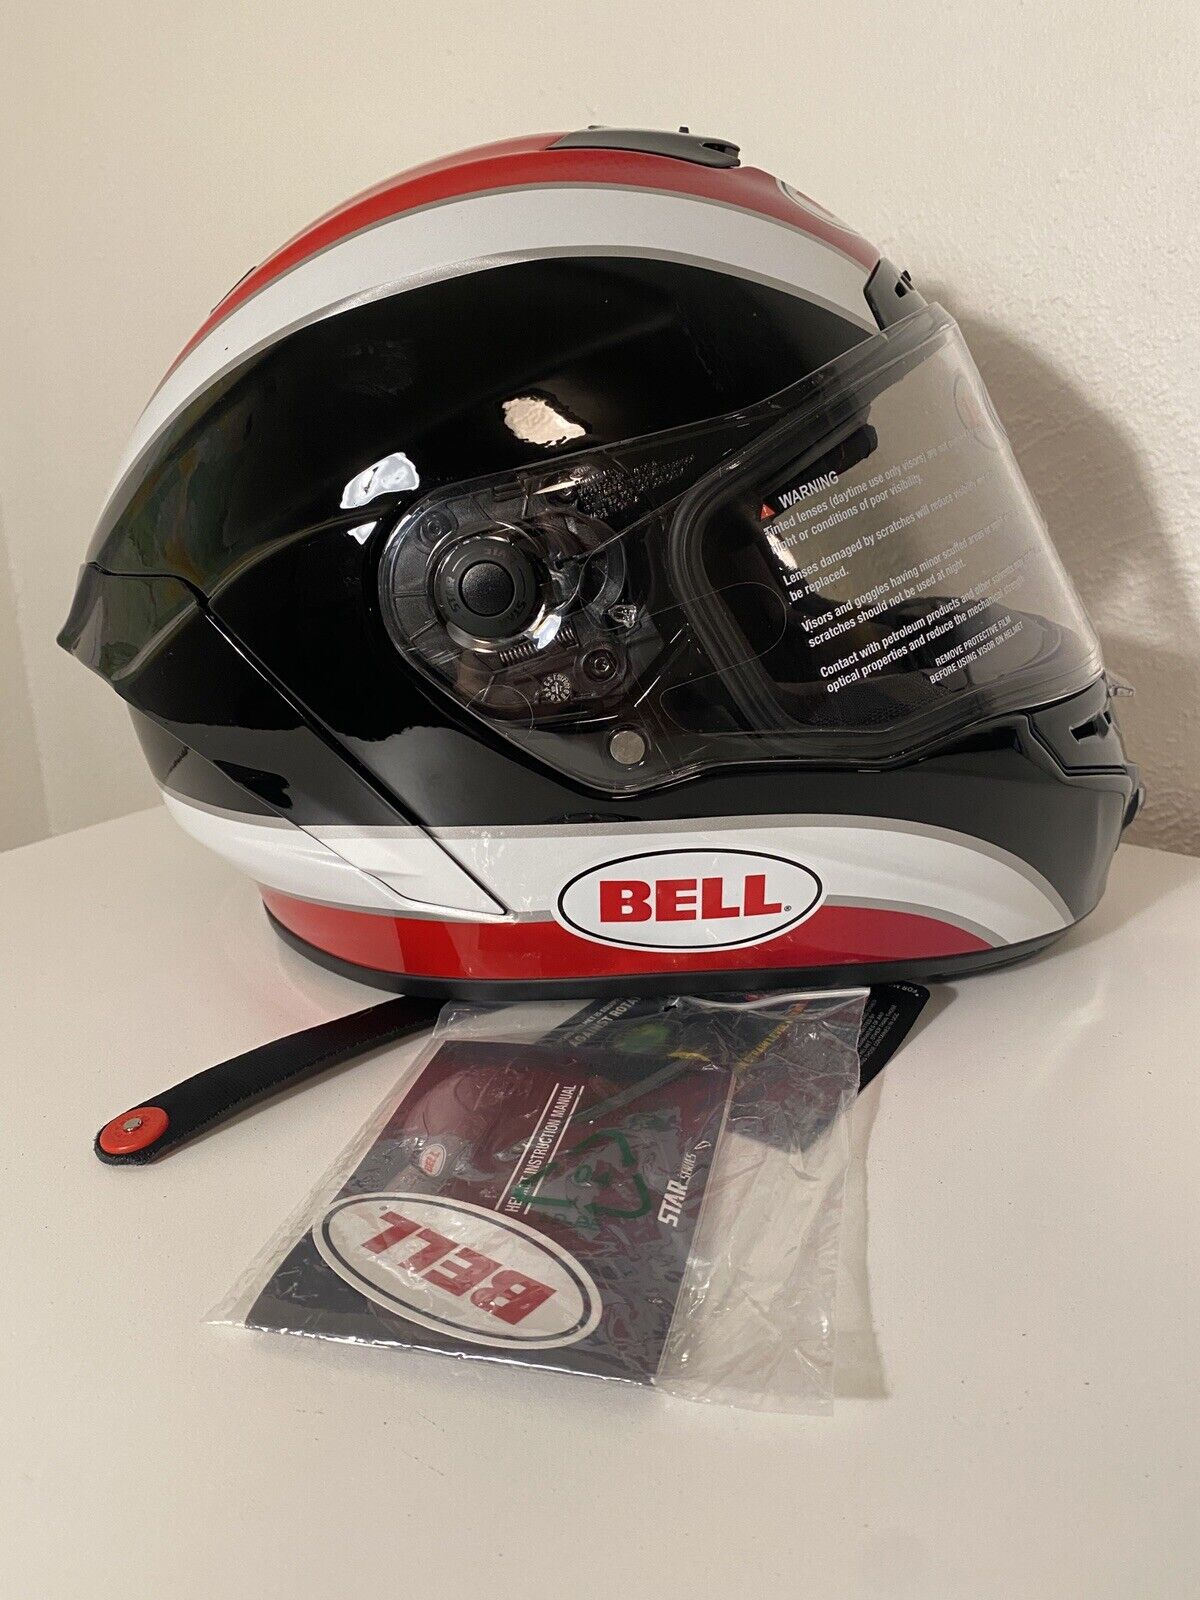 BRAND NEW Bell Star 2018 Helmet XL motorcycle, With Tags,Faceshield & Carry Bag